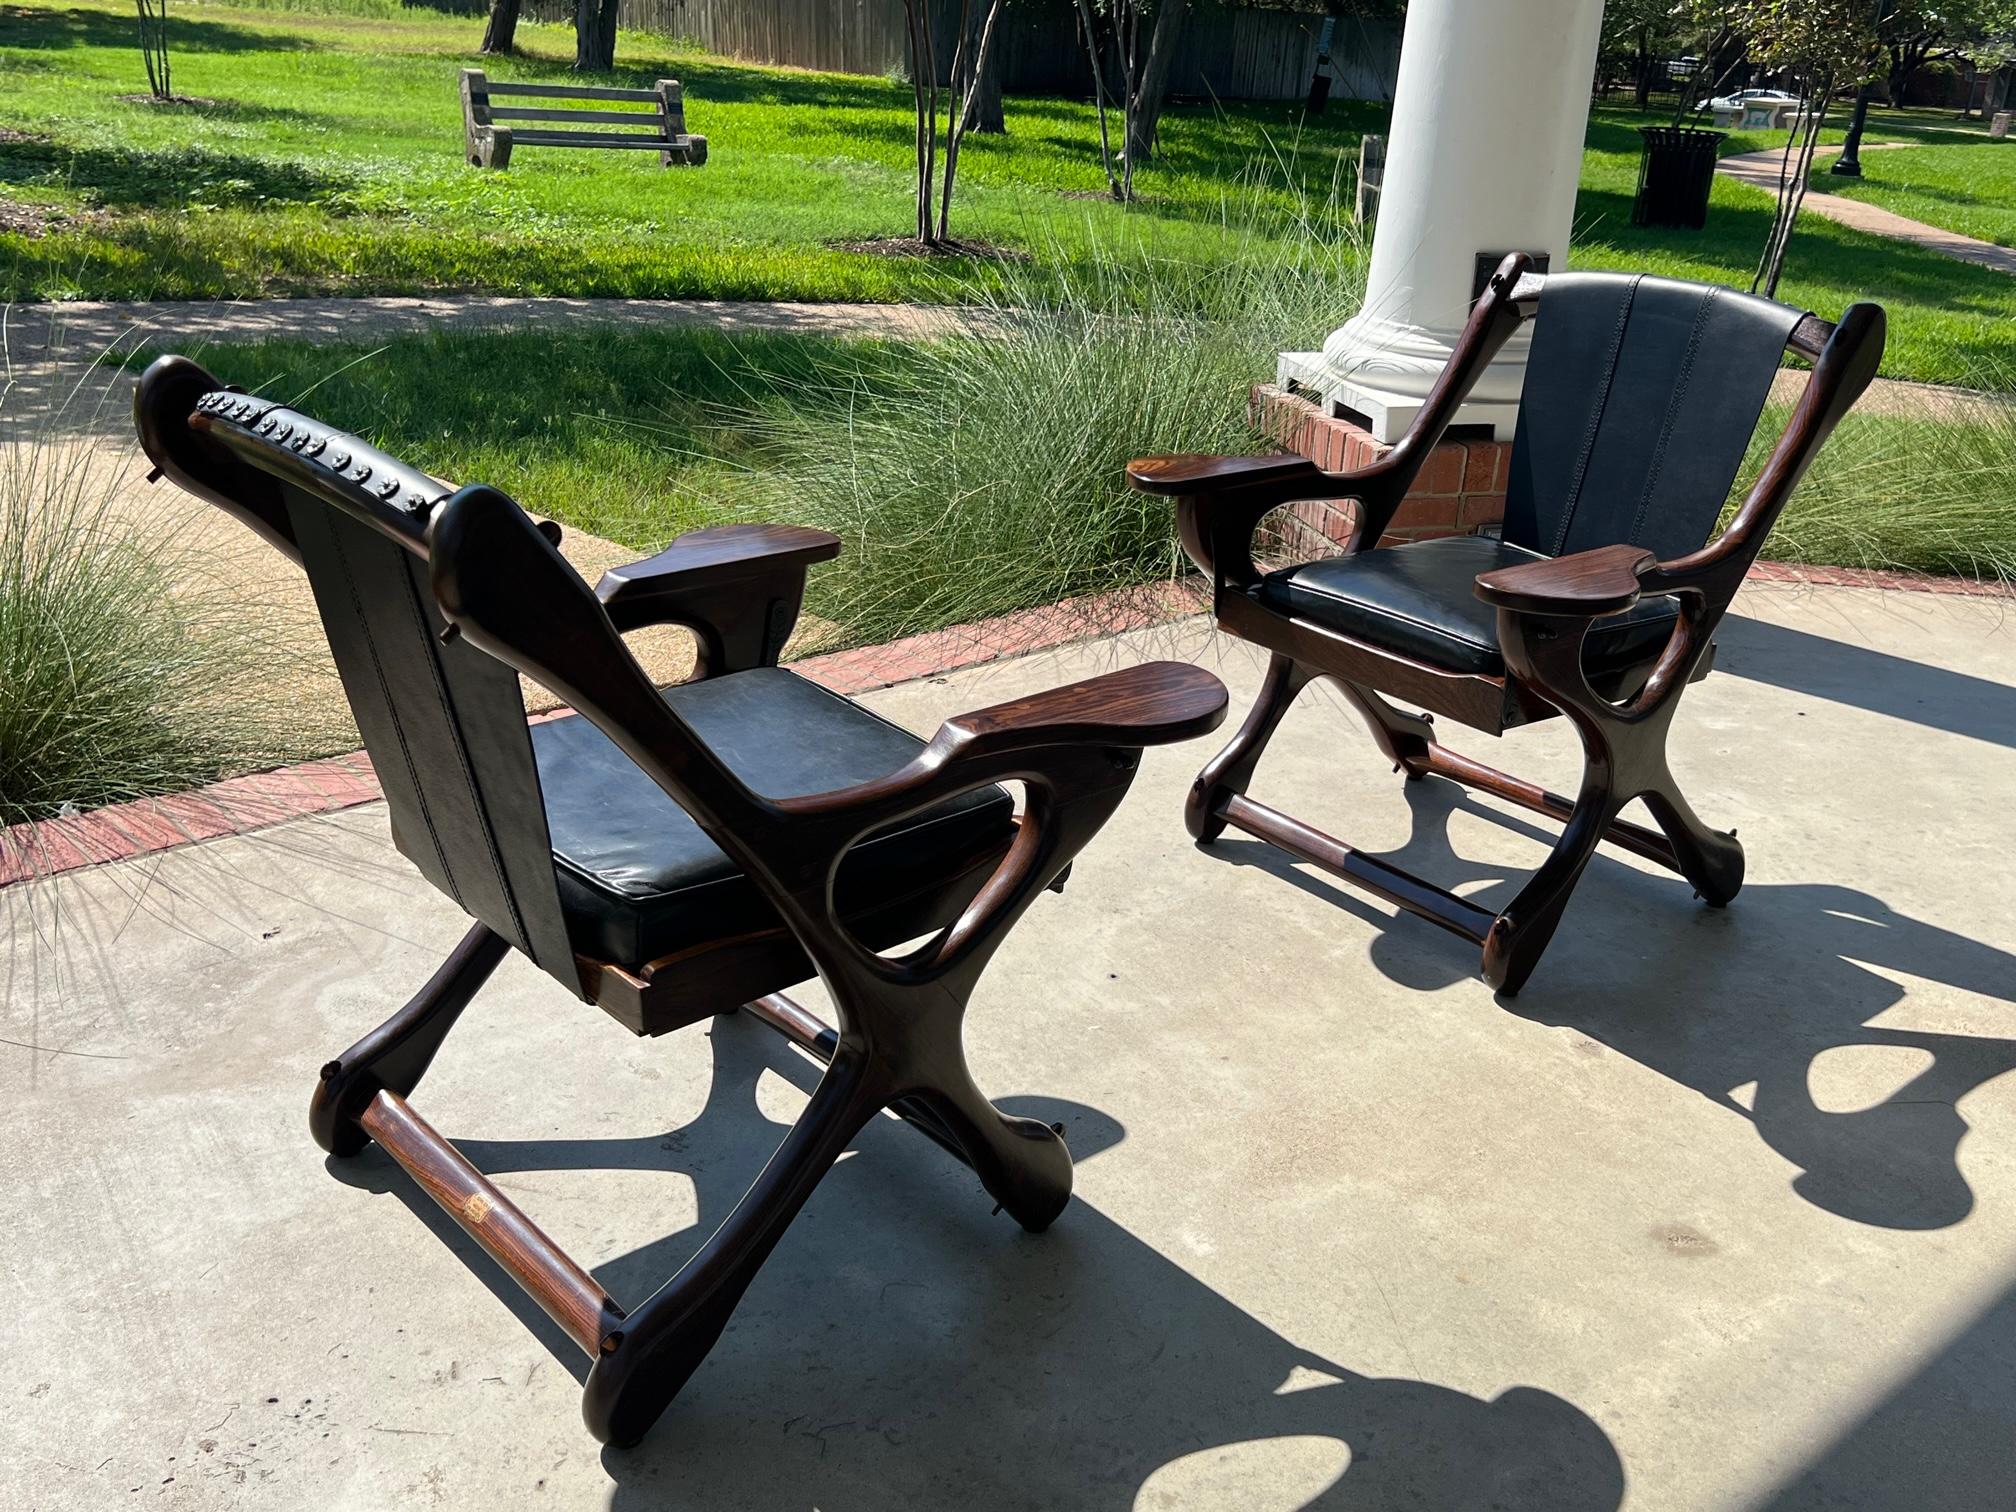 Mid-Century Mexican Modern Don Shoemaker Senal SA Sling Swinger Chairs Set of 4 For Sale 4